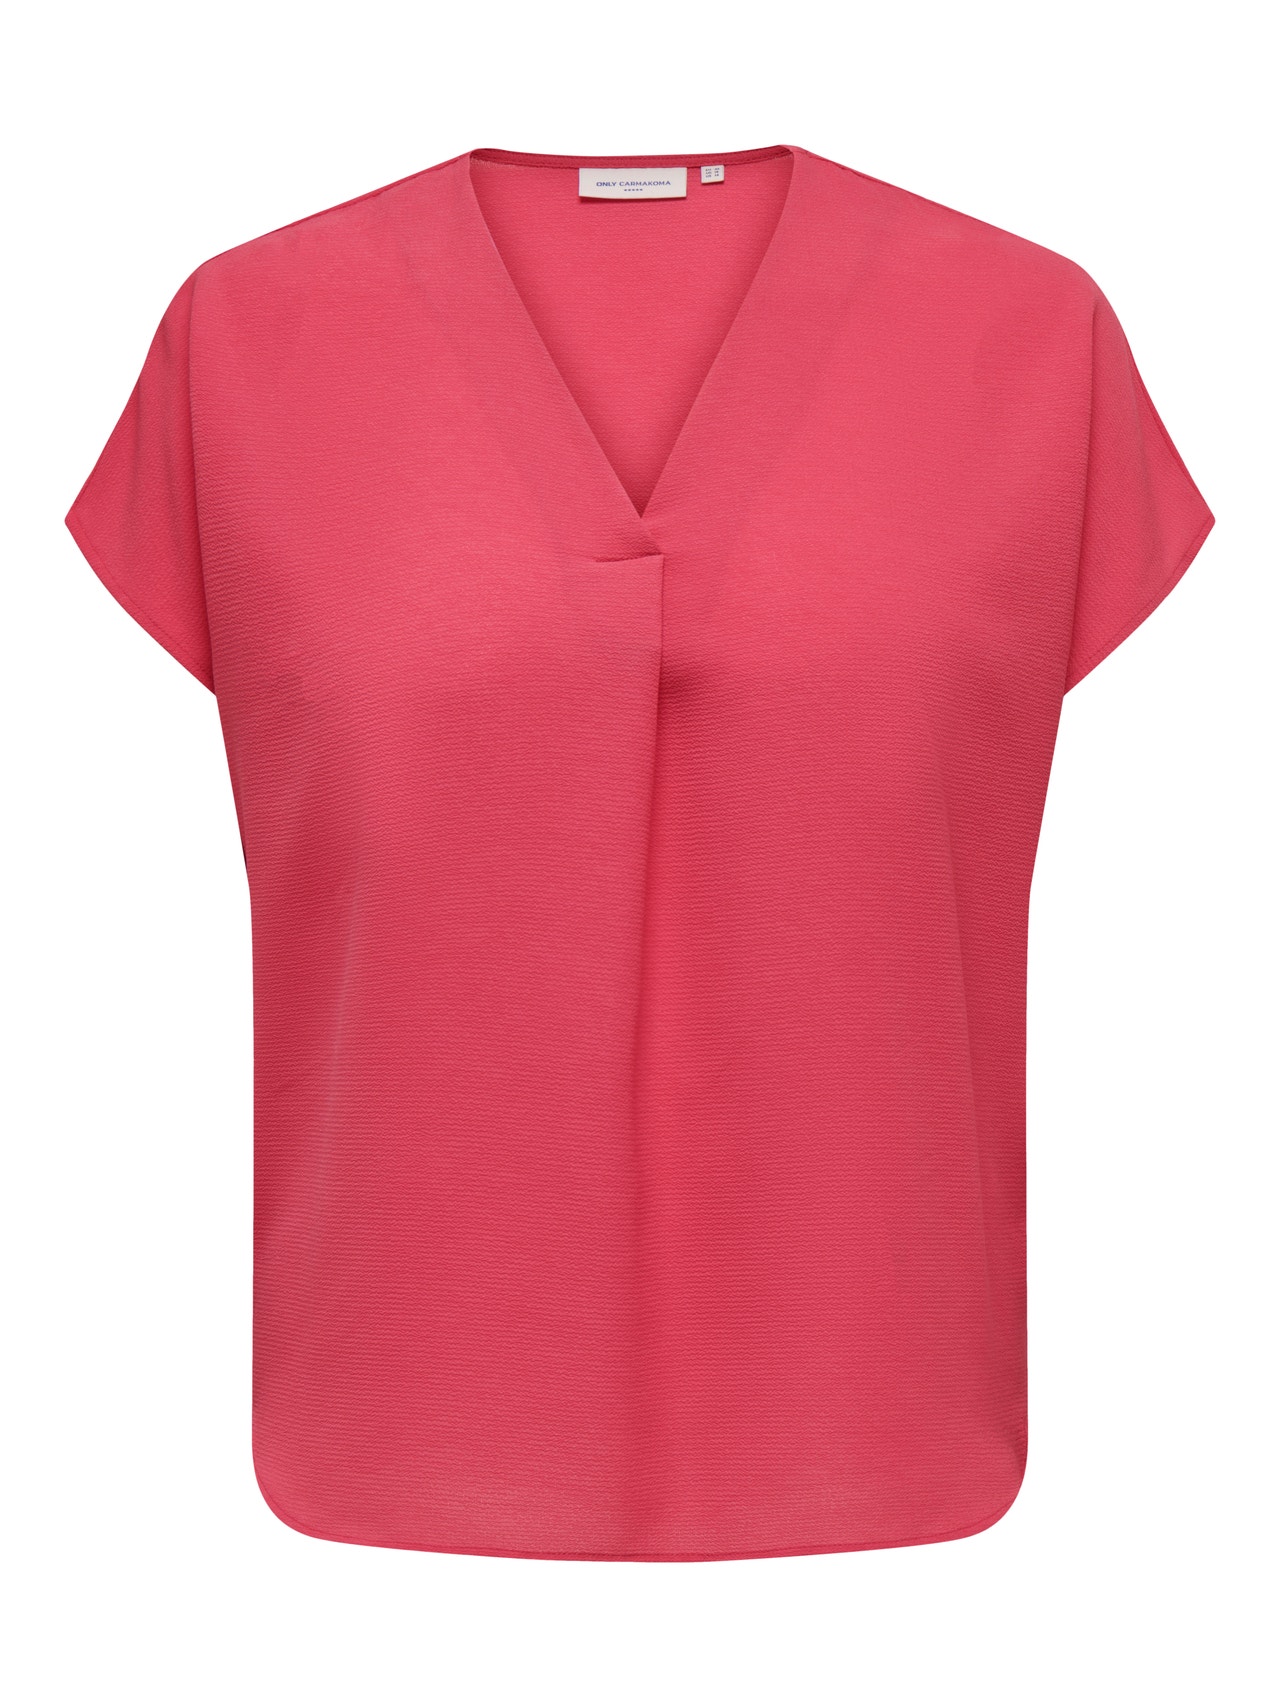 ONLY Curvy v-neck Top -Teaberry - 15299246